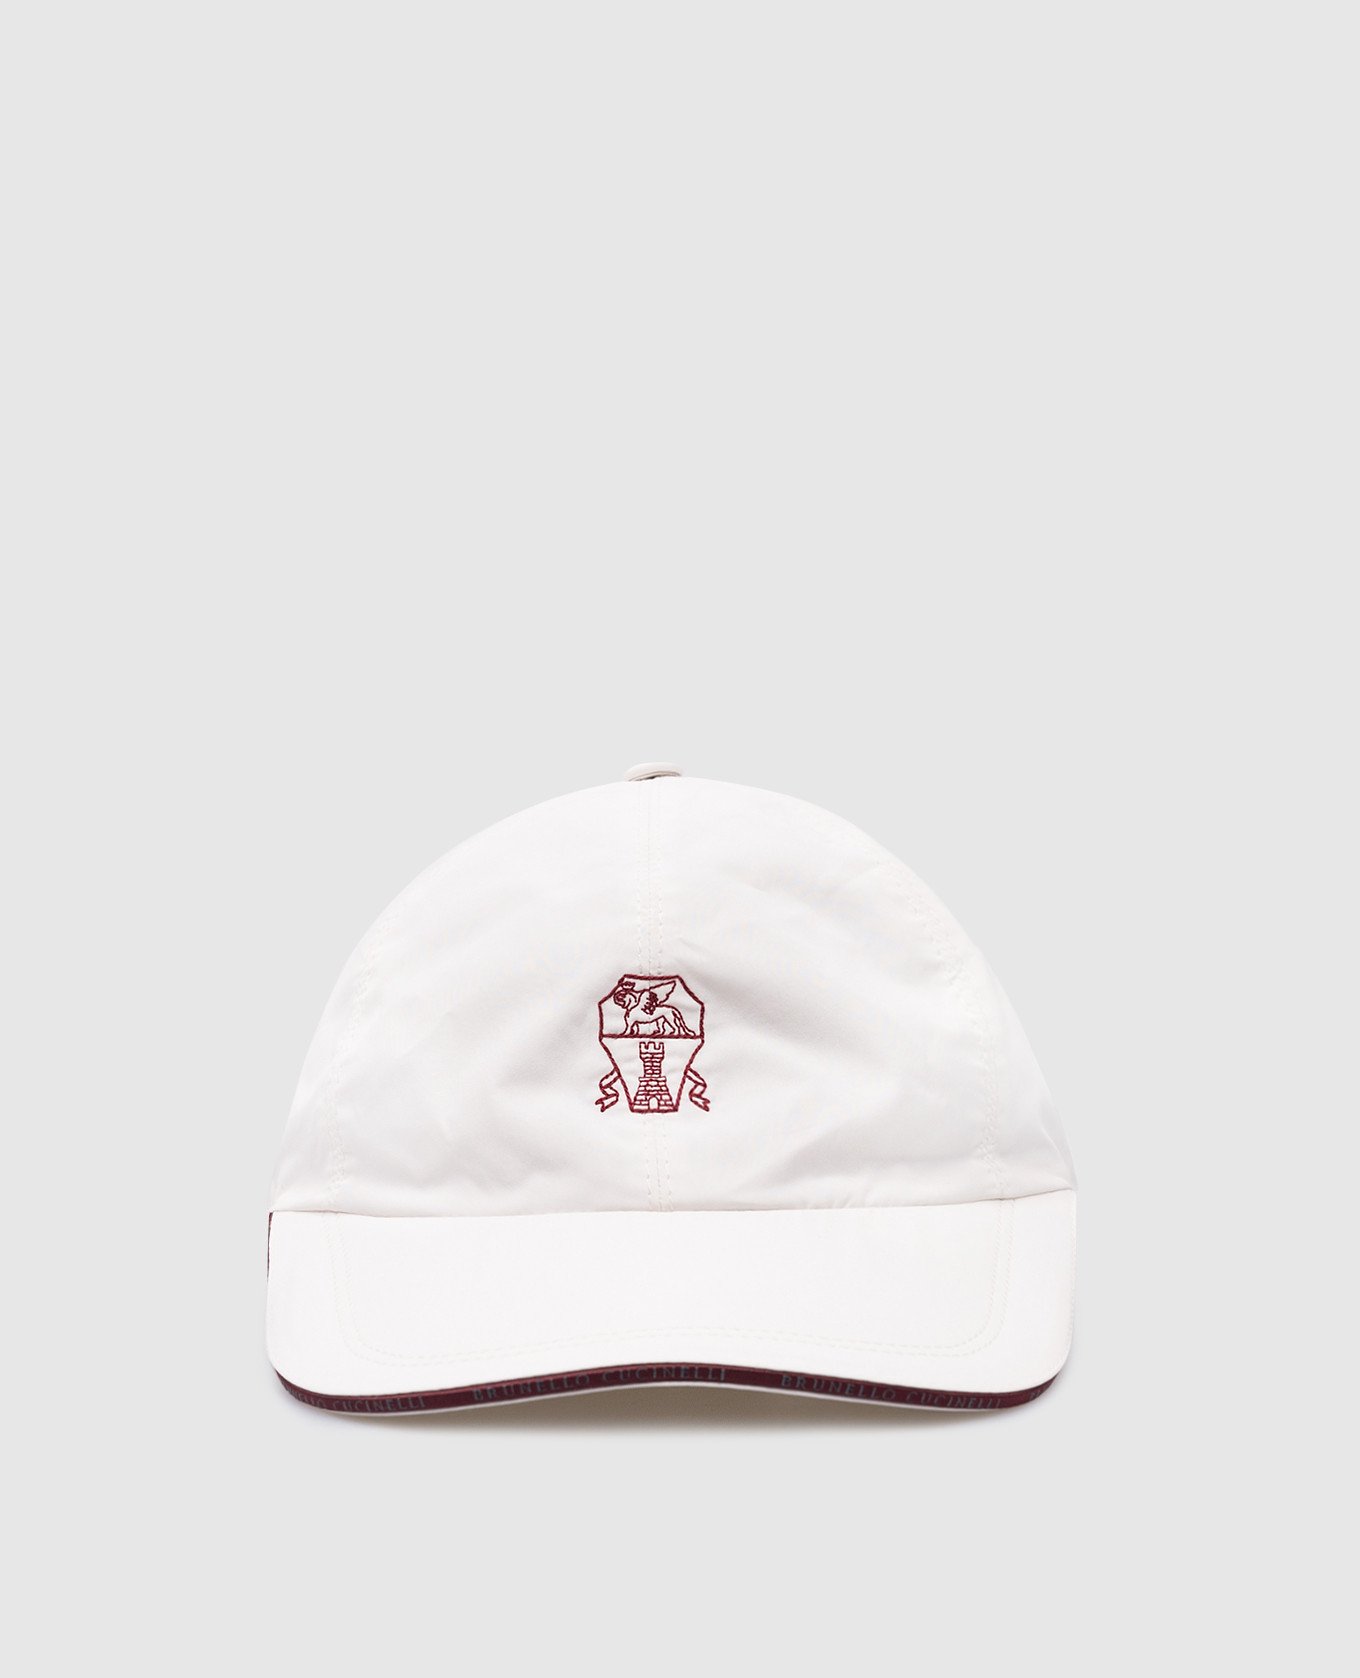 White cap with embroidered logo emblem